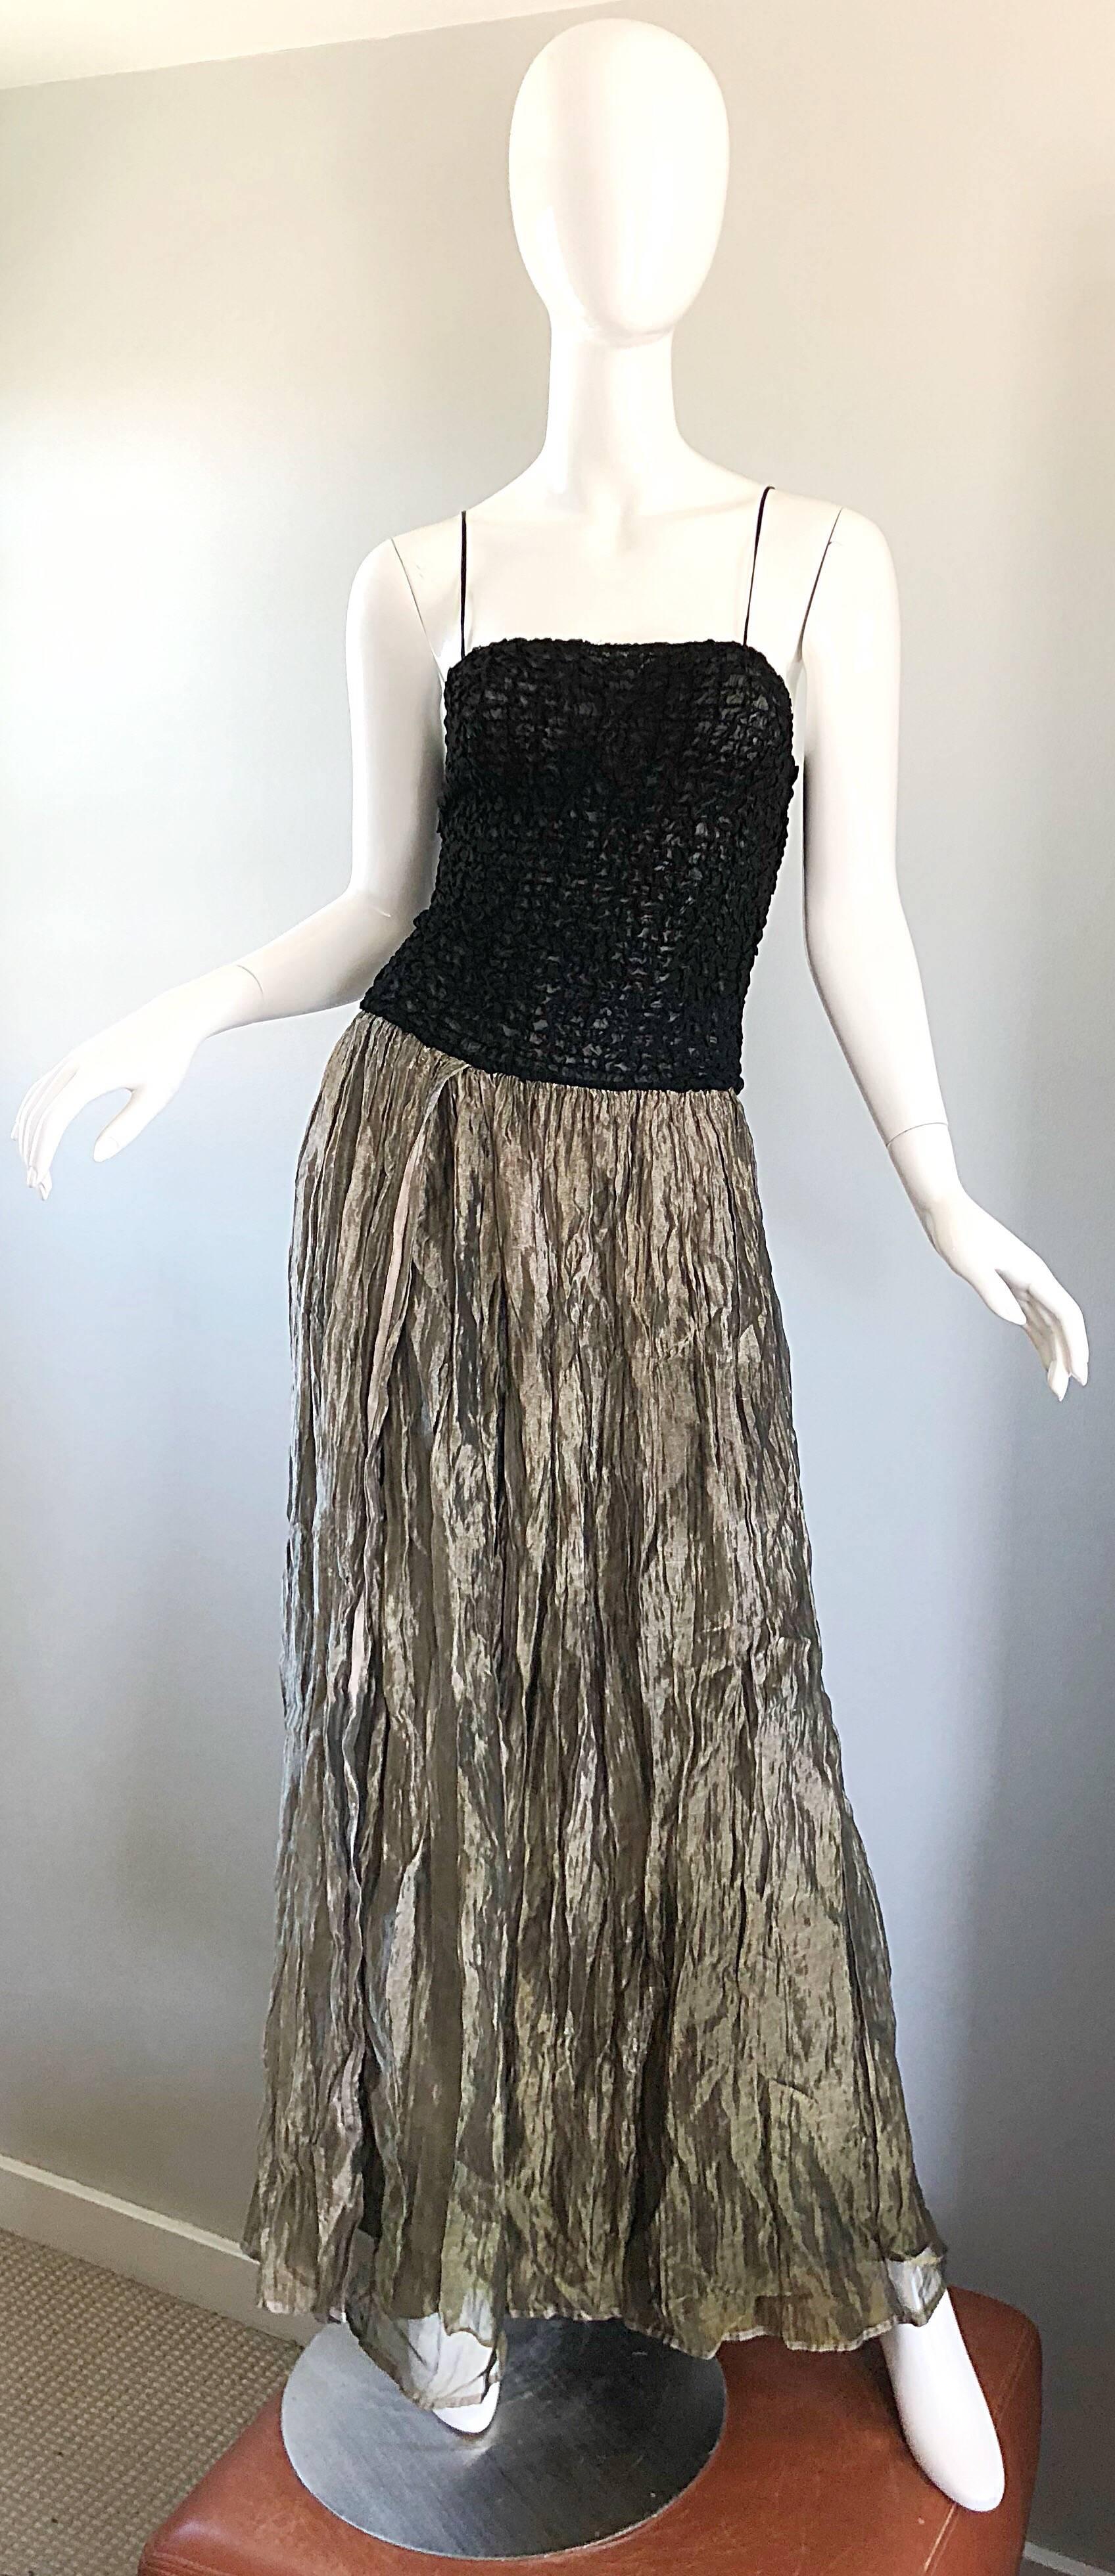 Stunning 1990s MORGANE LE FAY black and gold ombre metallic evening gown! Features a spaghetti strap semi sheer bodice that stretches to fit. Panels of gold / bronze ombre crinkled silk skirt with a black underlay. Looks phenomenal on. THe pictured